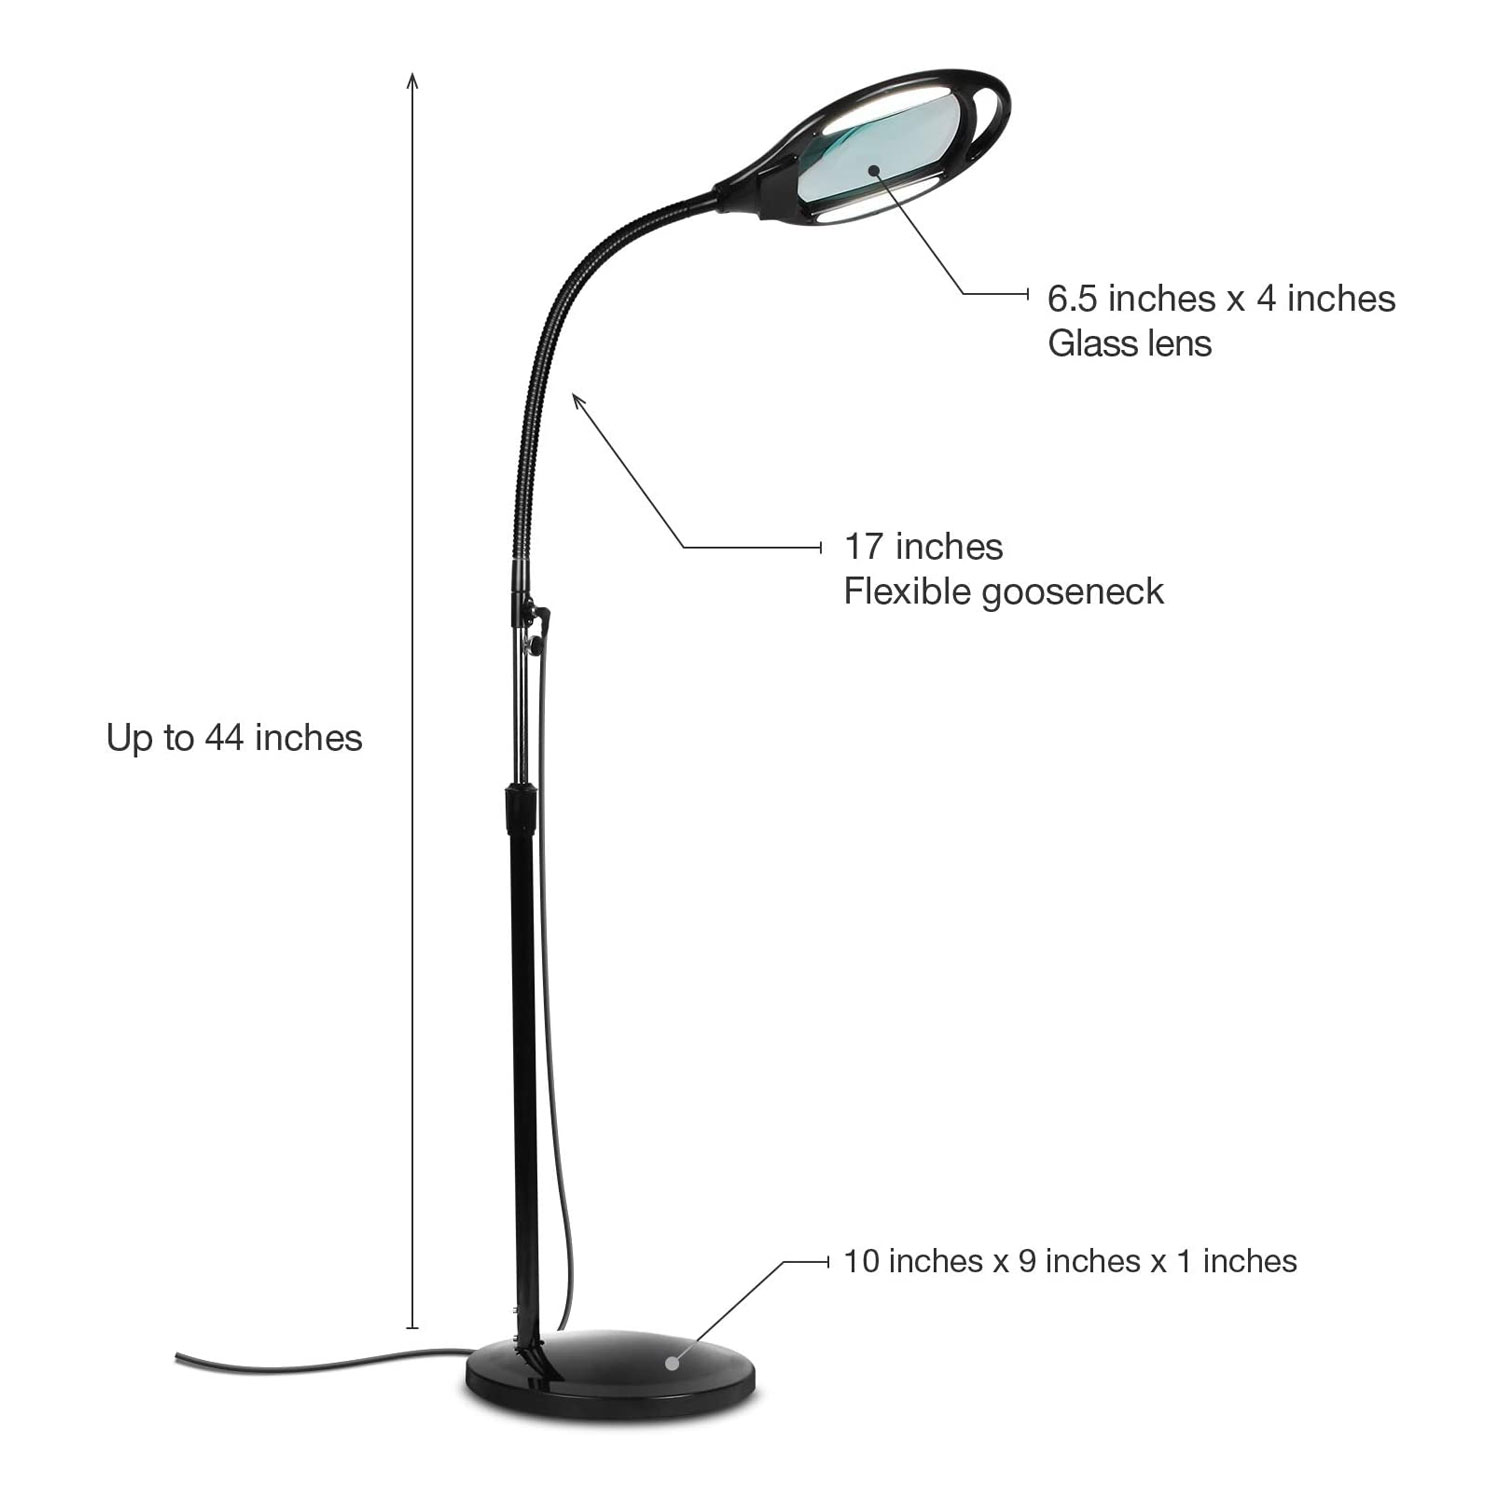 brightech lightview pro led magnifying floor lamp